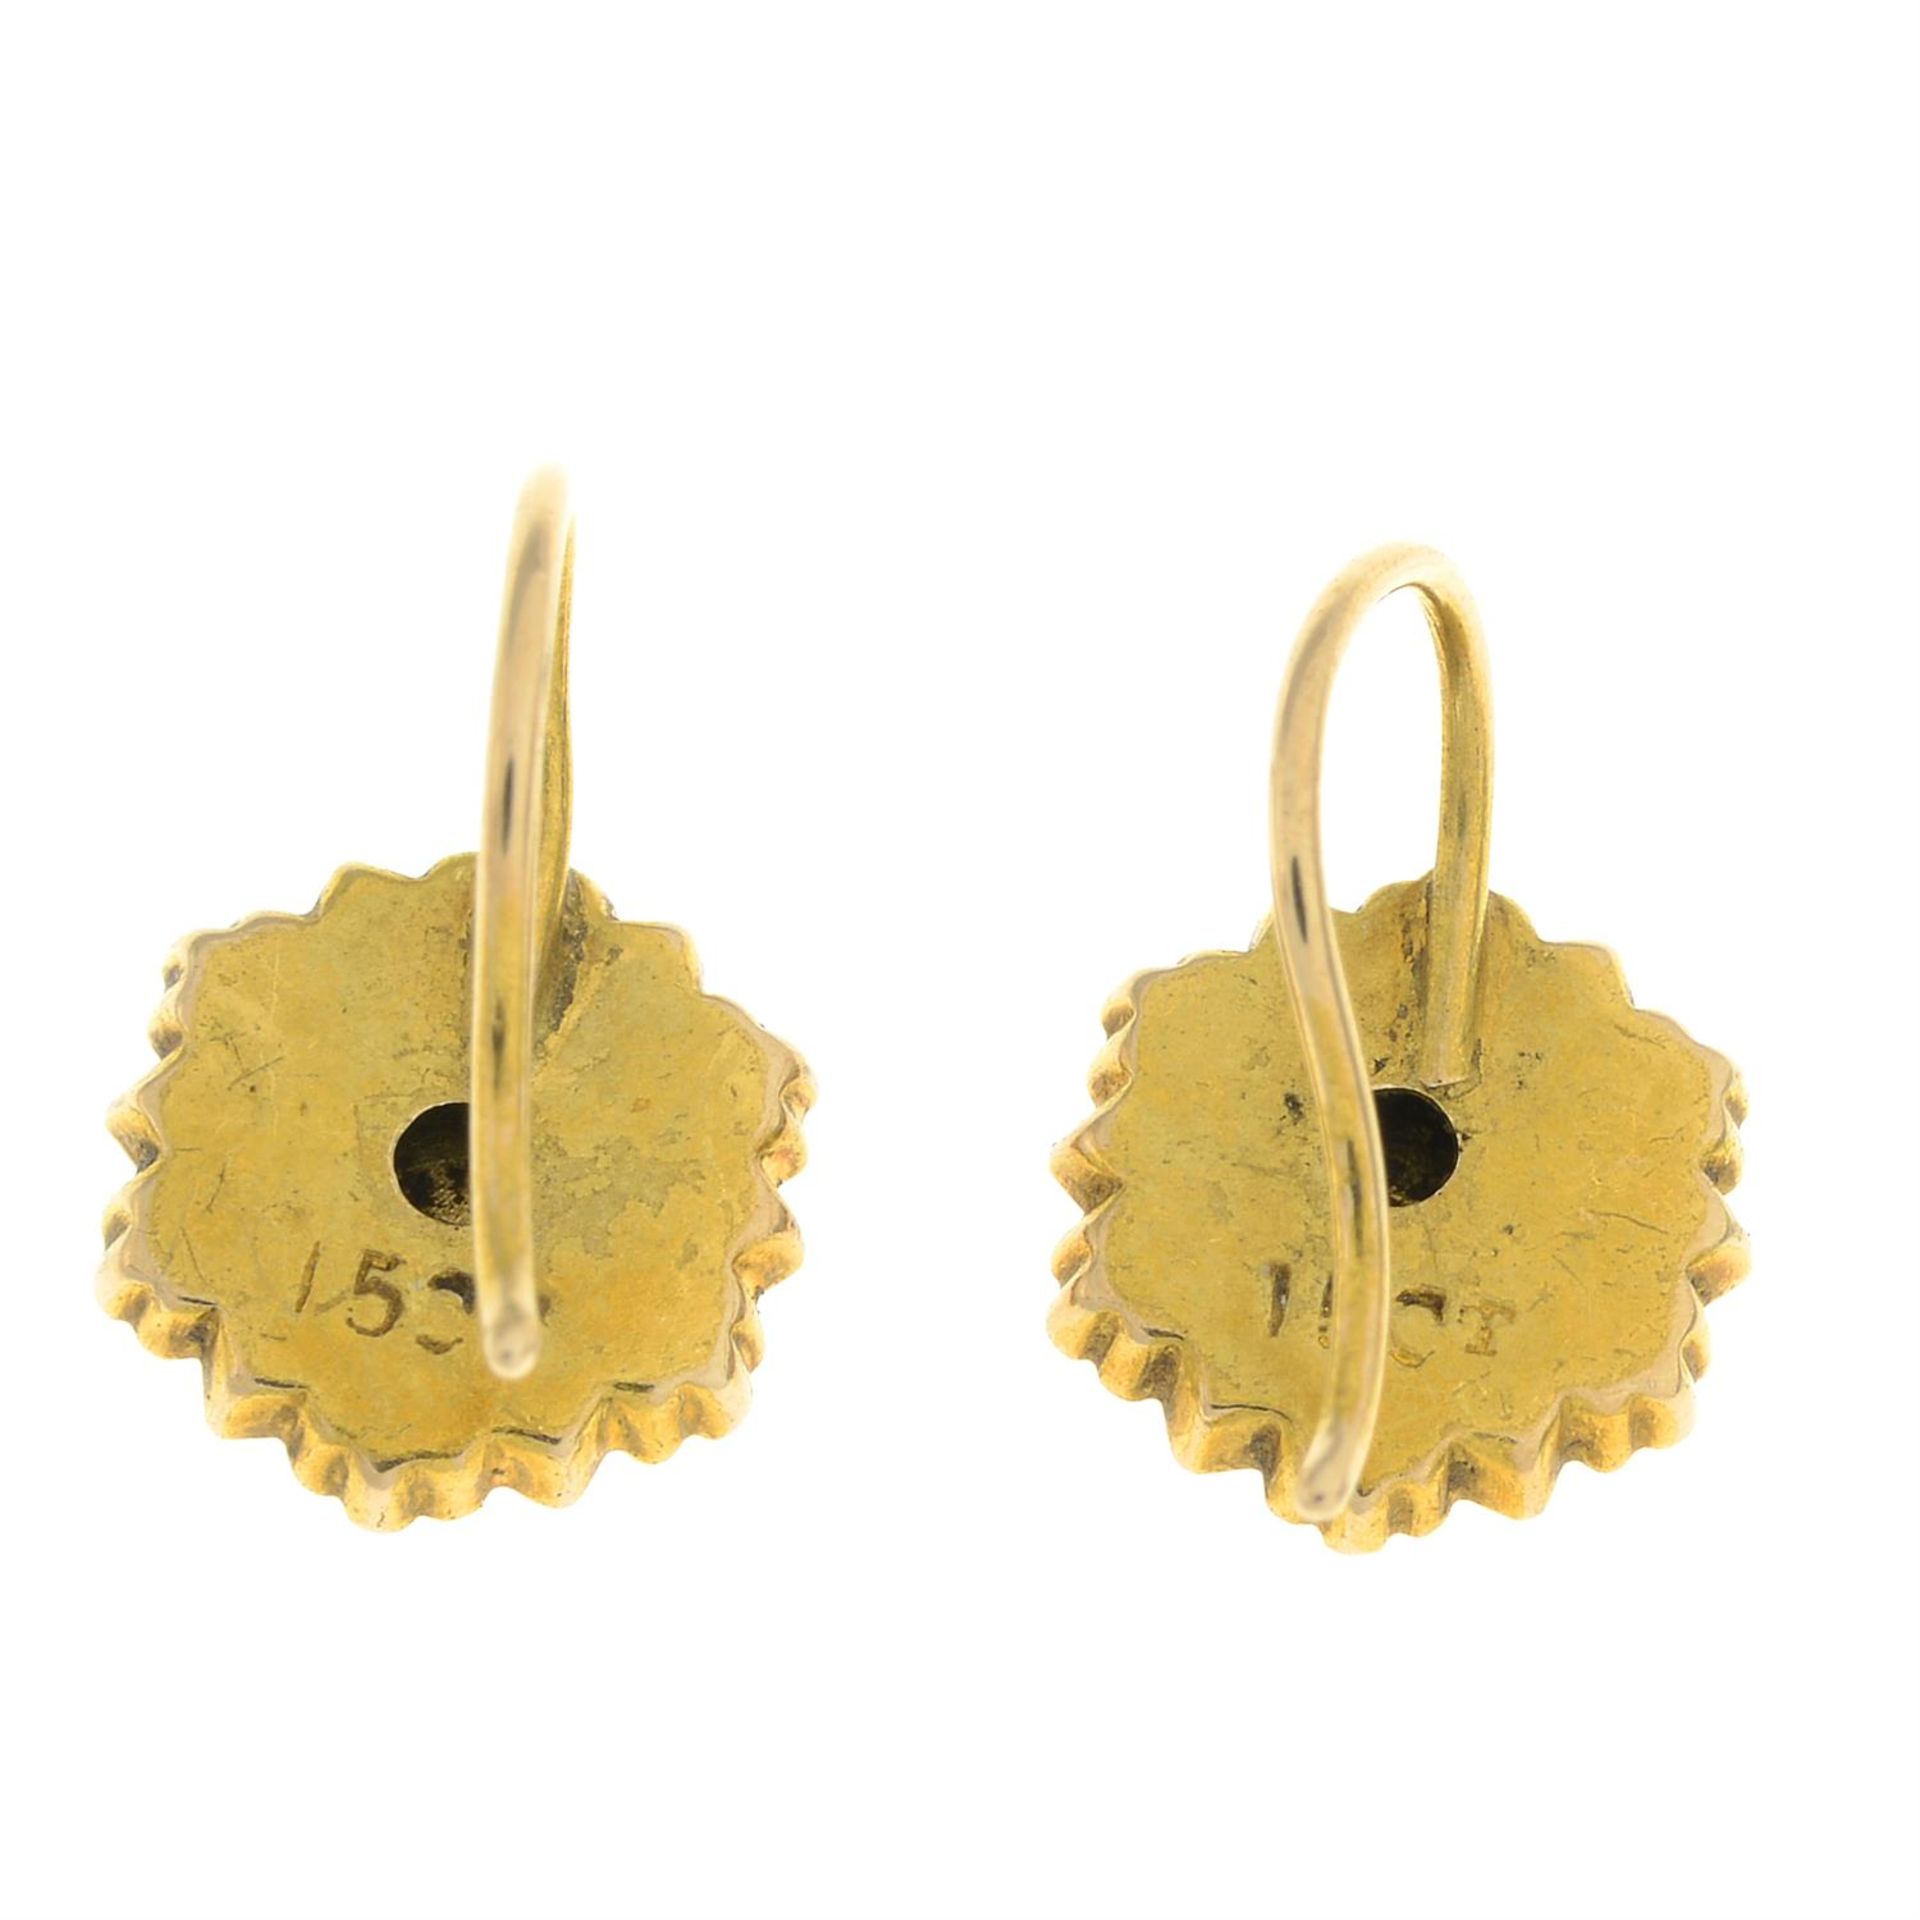 Victorian 15ct gold diamond earrings - Image 2 of 3